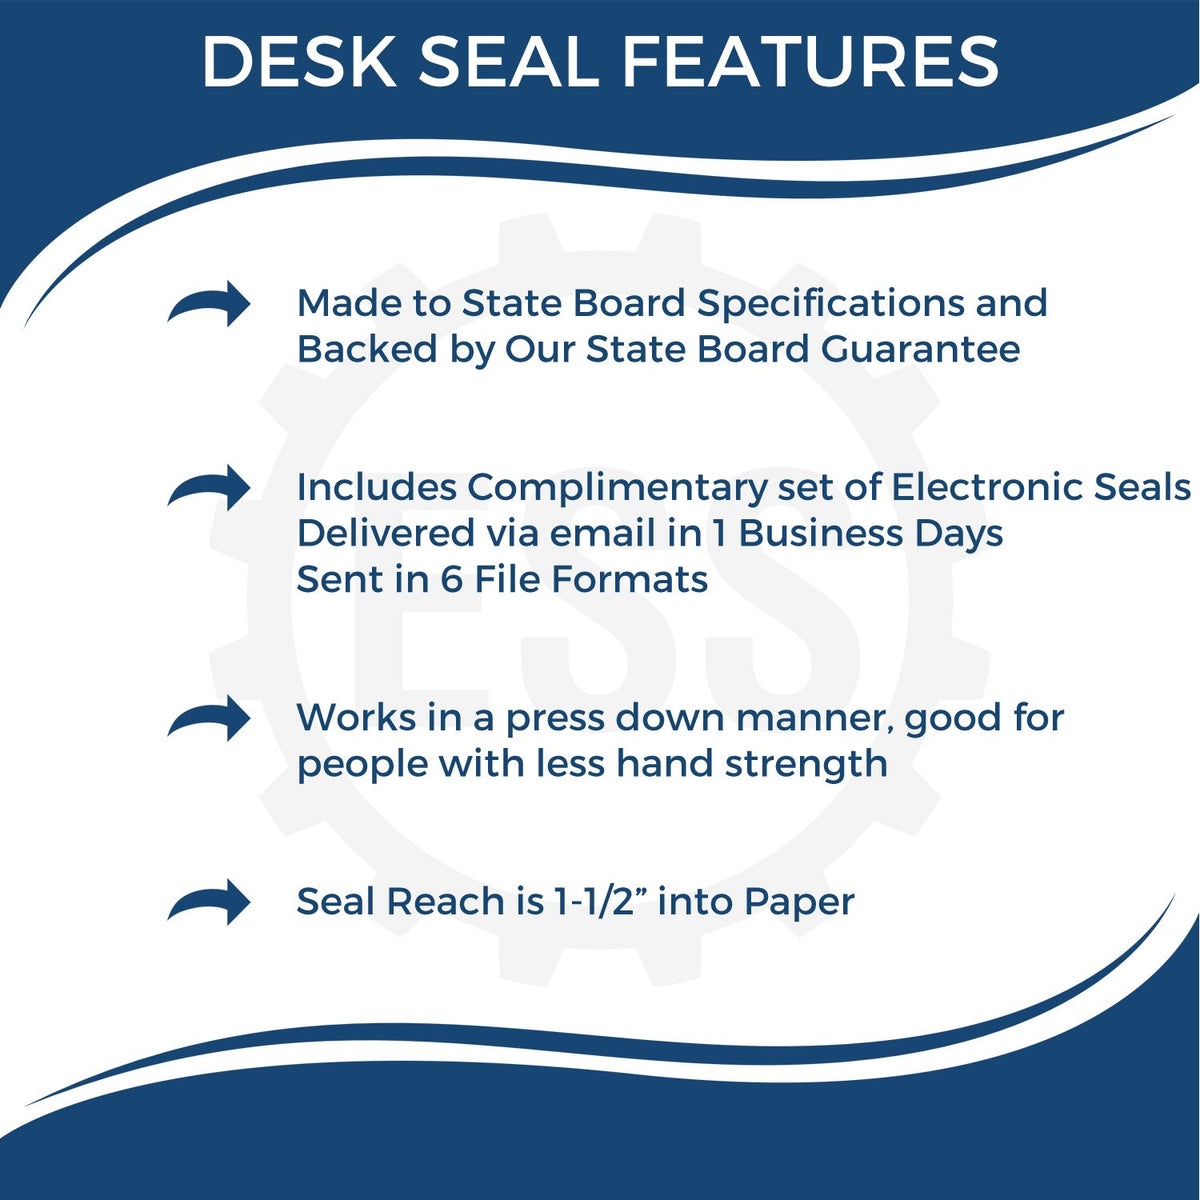 A picture of an infographic highlighting the selling points for the Oklahoma Desk Architect Embossing Seal